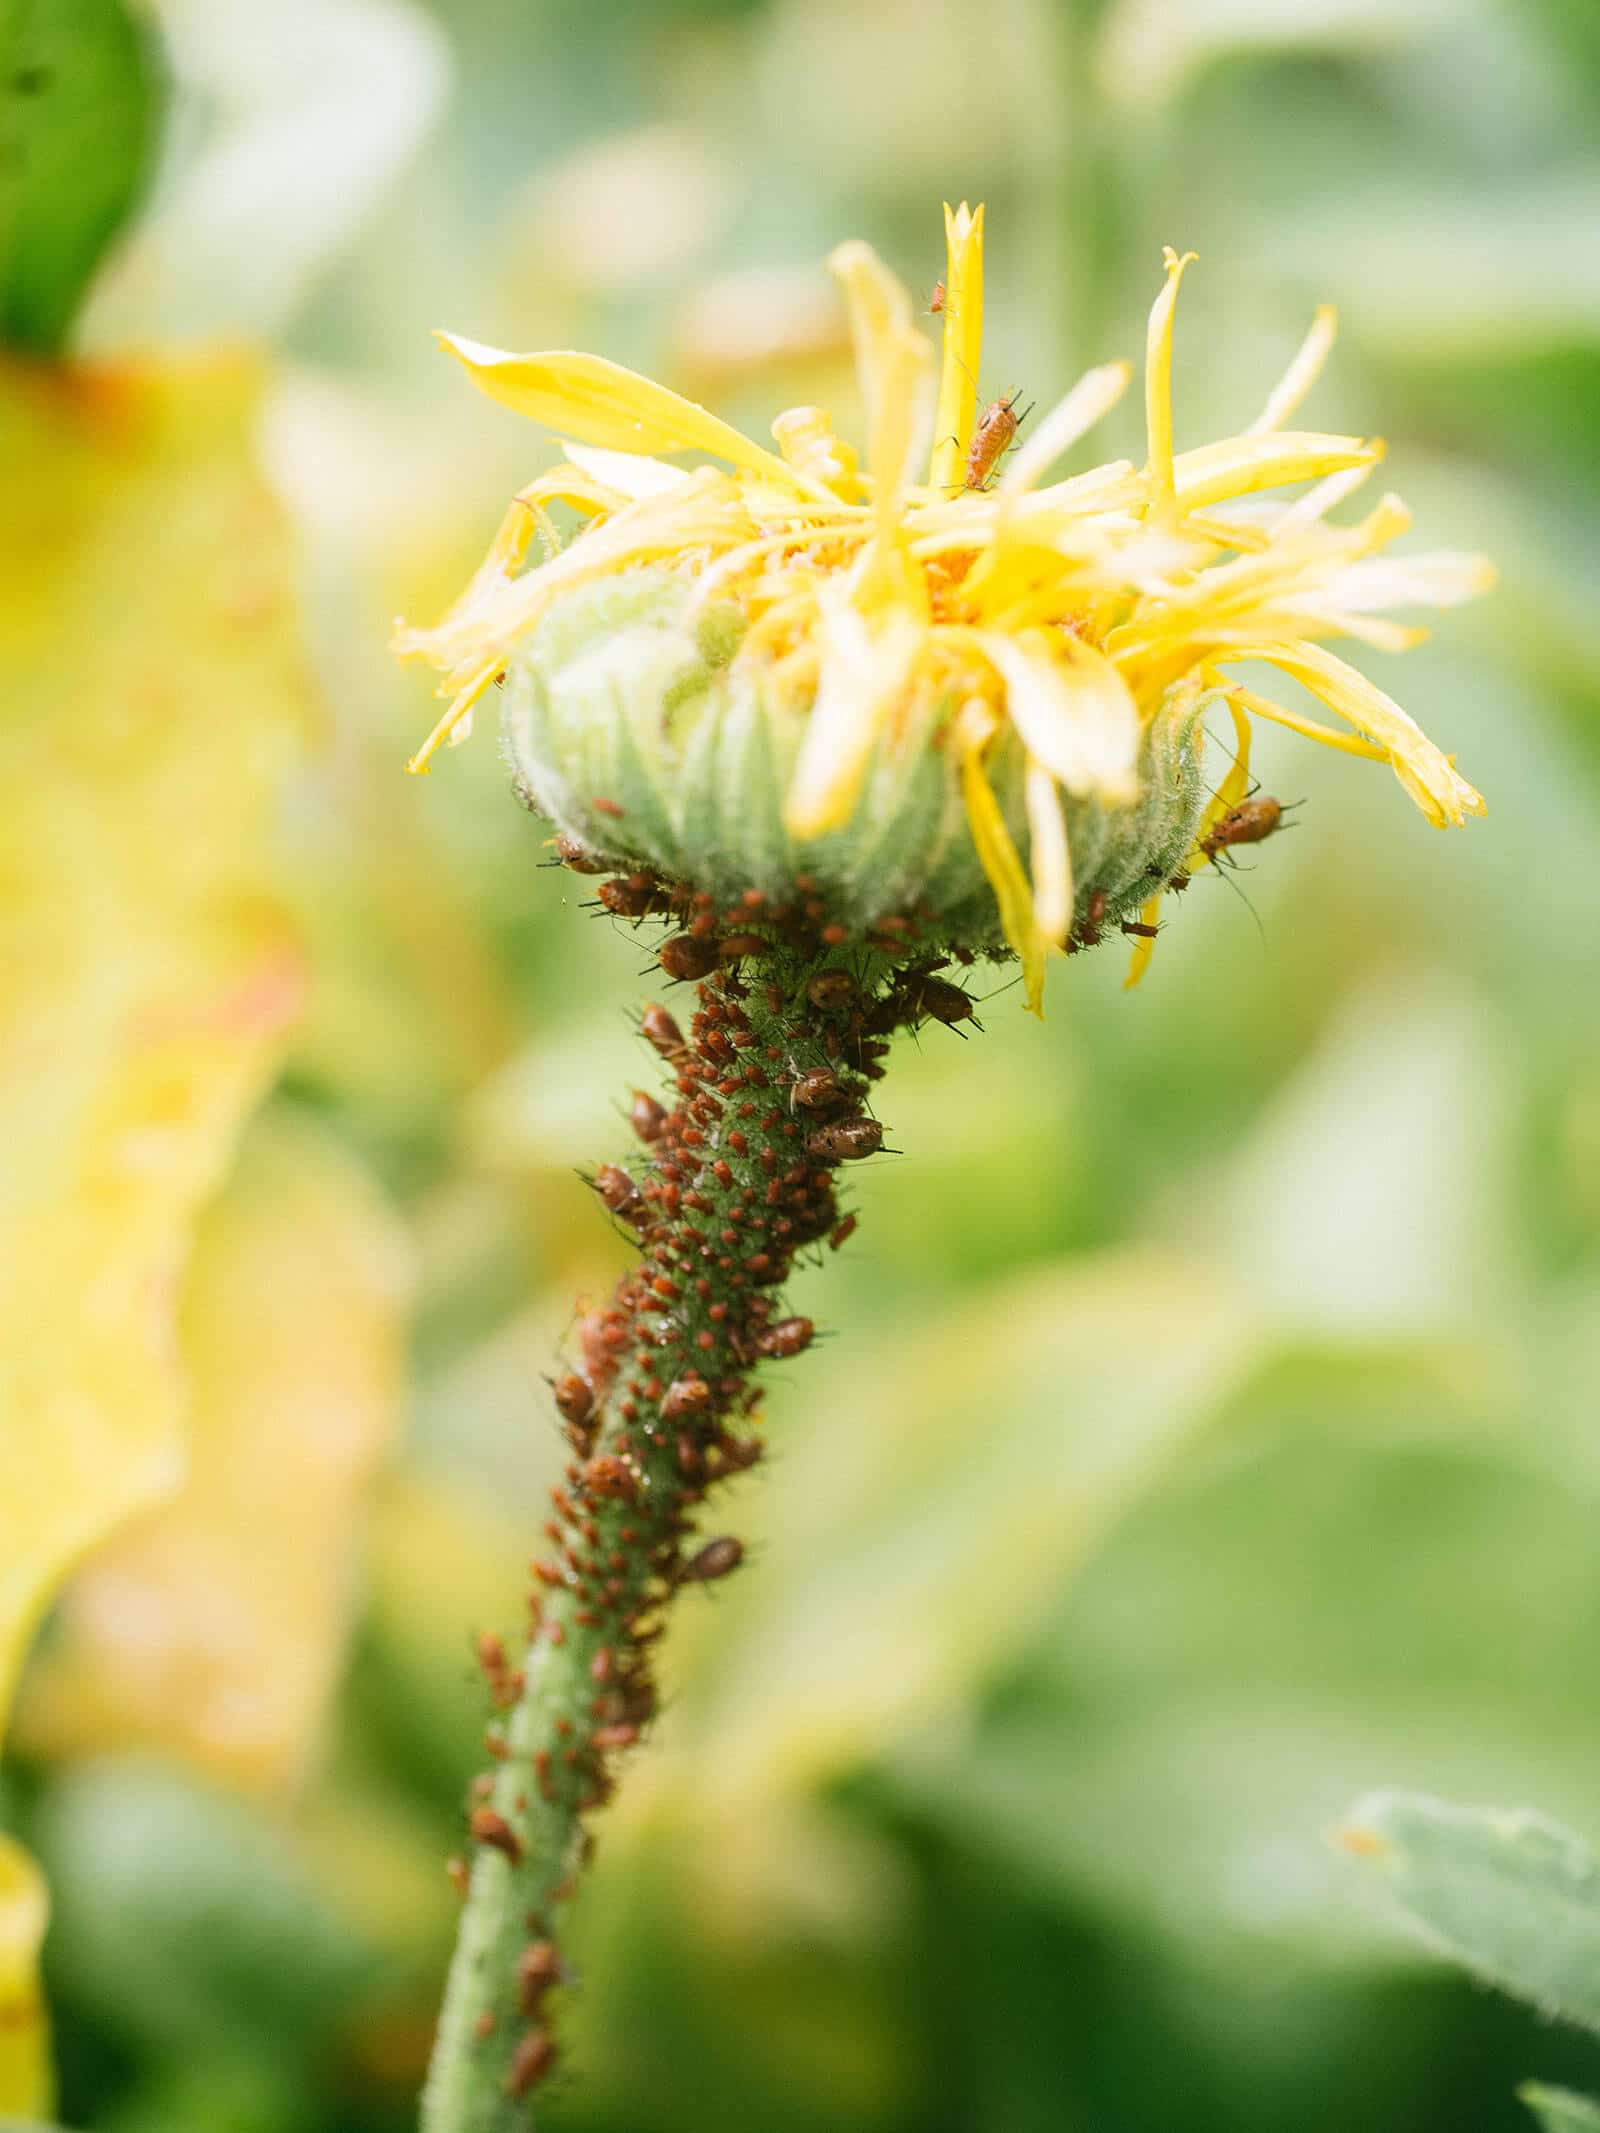 Keep aphids away from more valuable crops by planting a trap crop (like calendula) around your yard